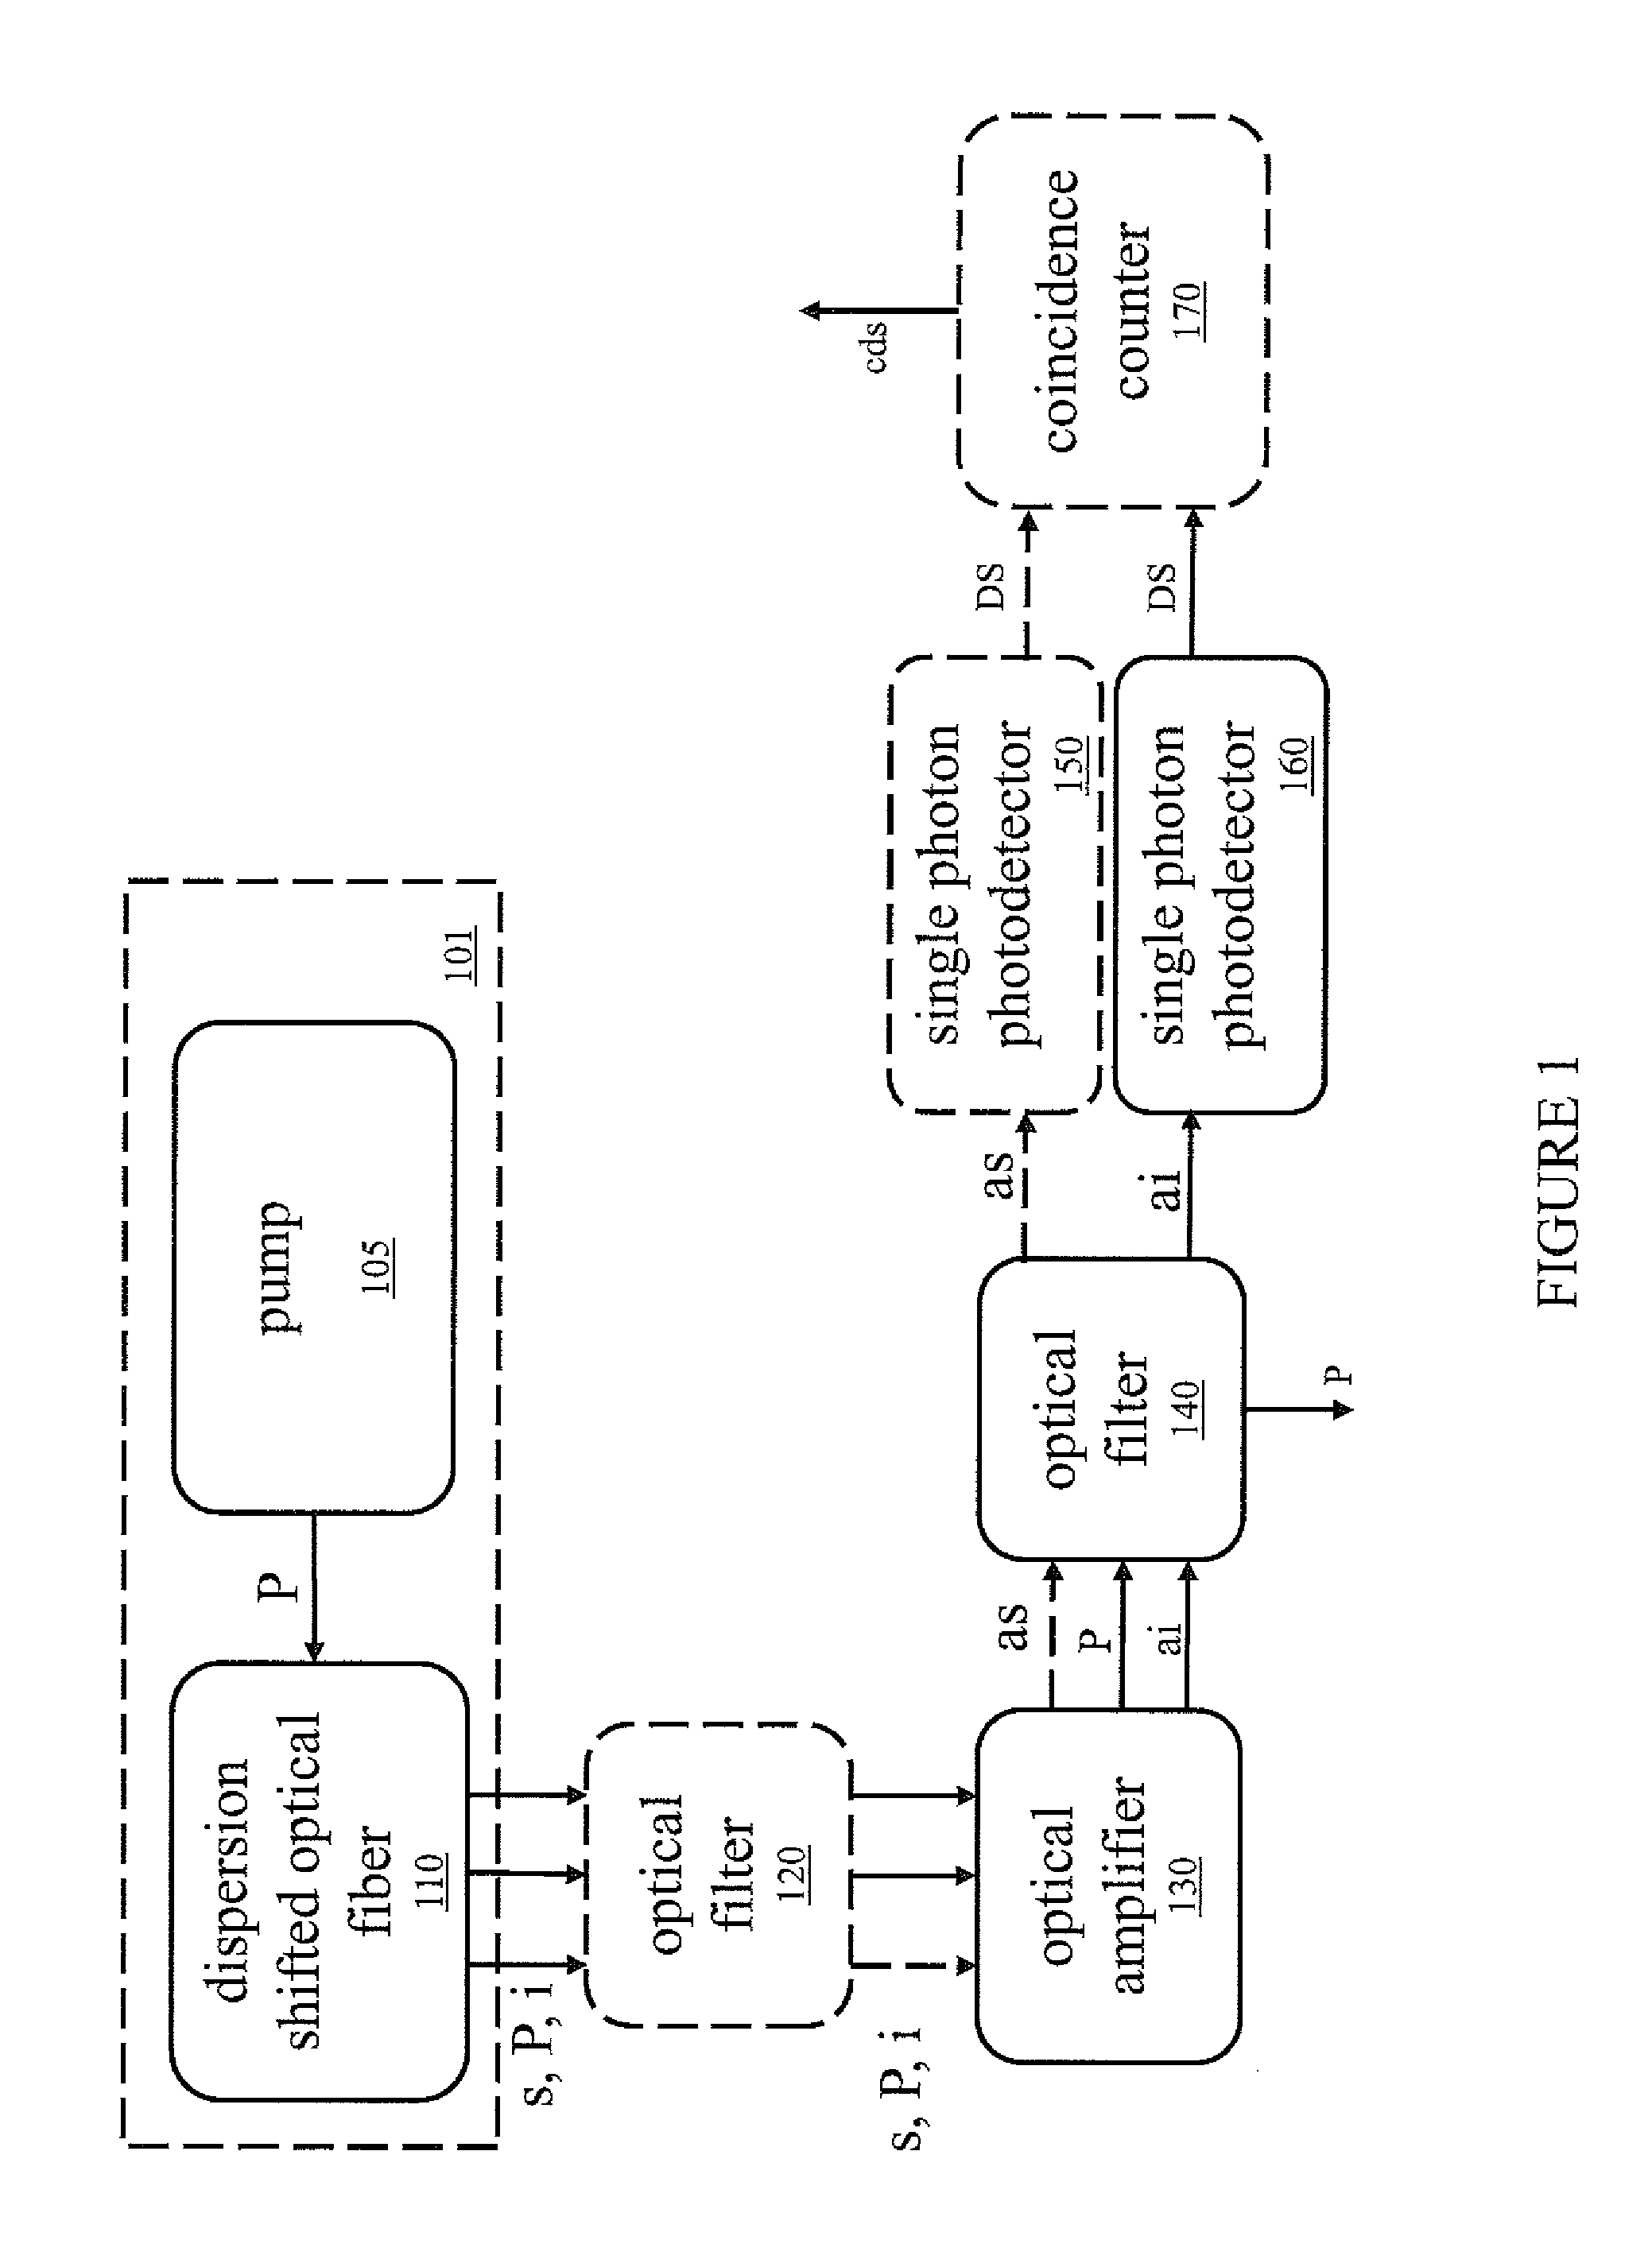 System and method for nonlinear optical devices